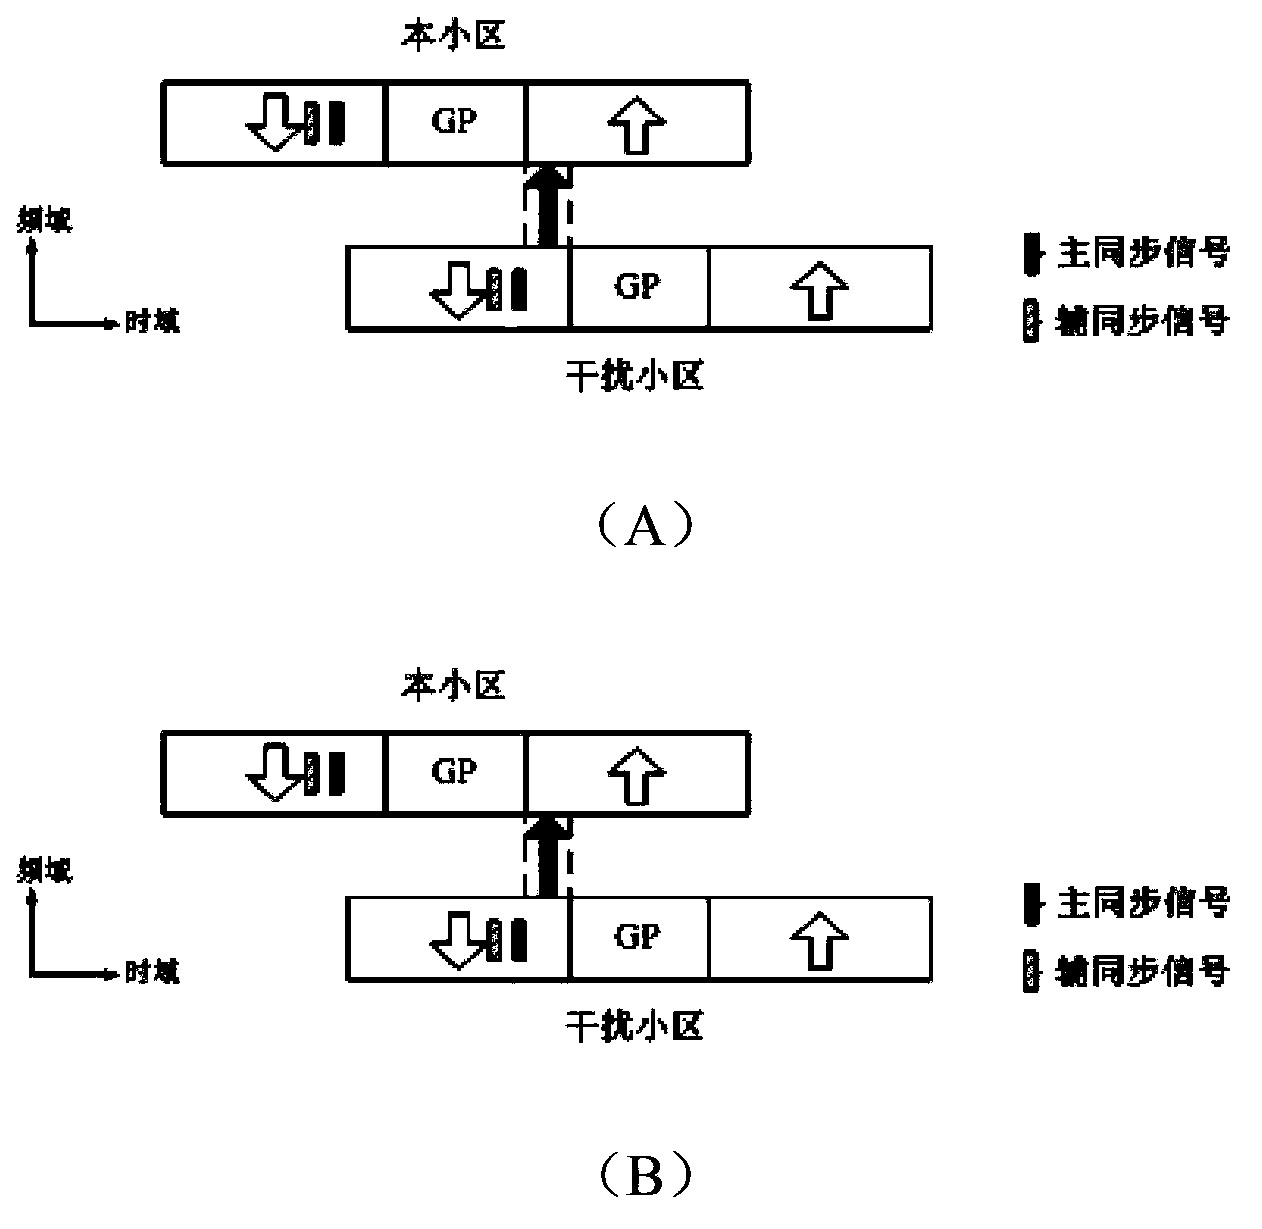 Long distance cofrequency interference source detection and positioning method for TD-LTE system